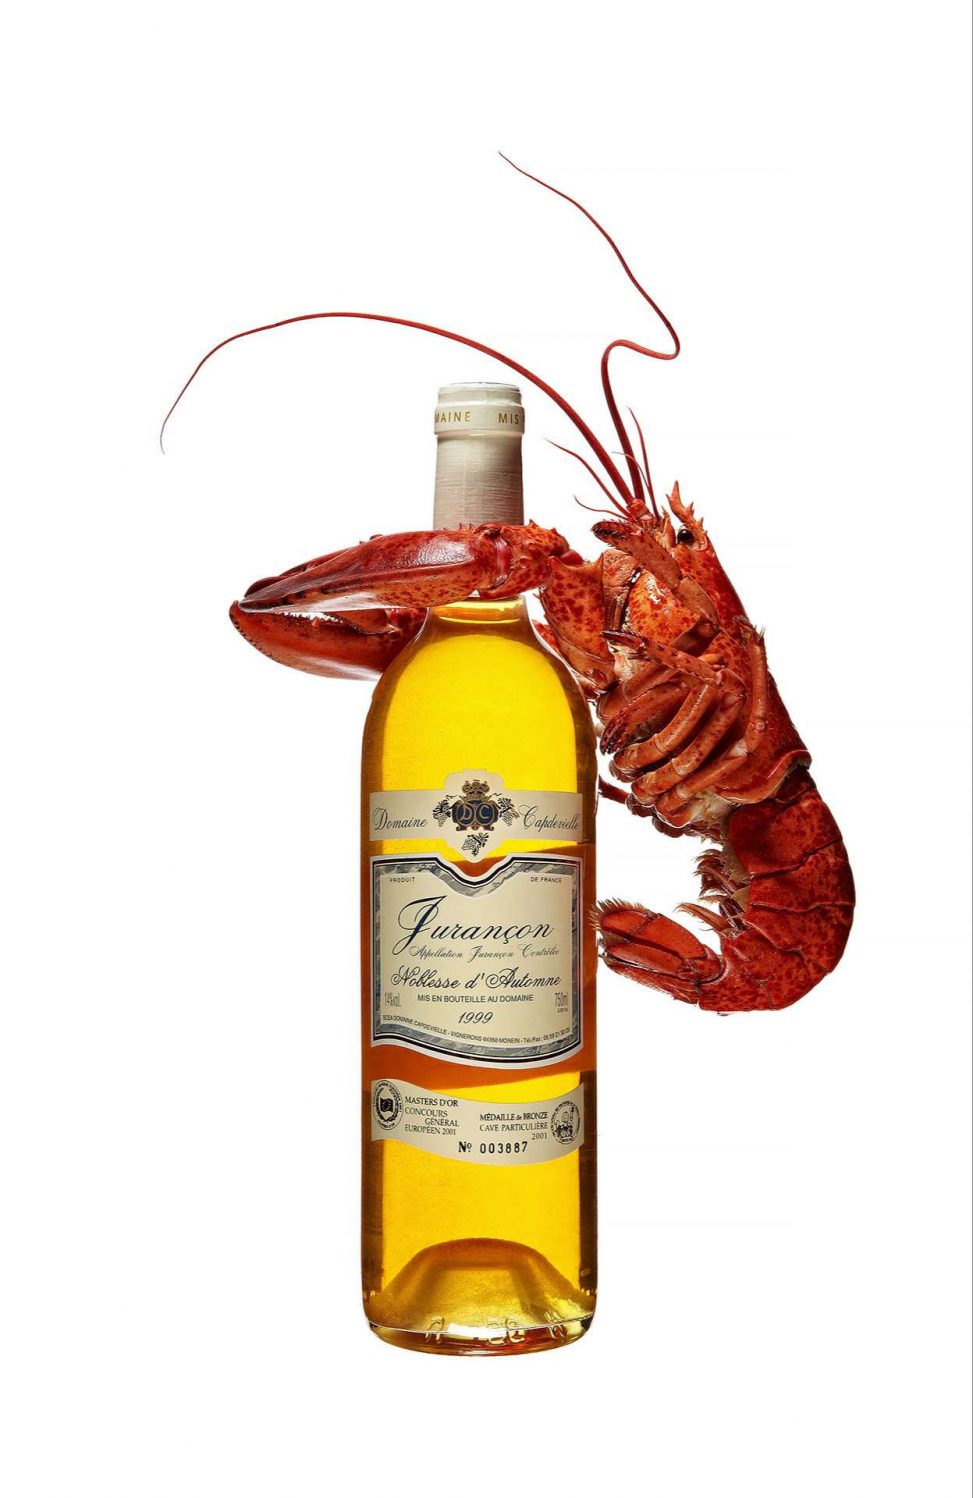 Lobster and White Wine bottle